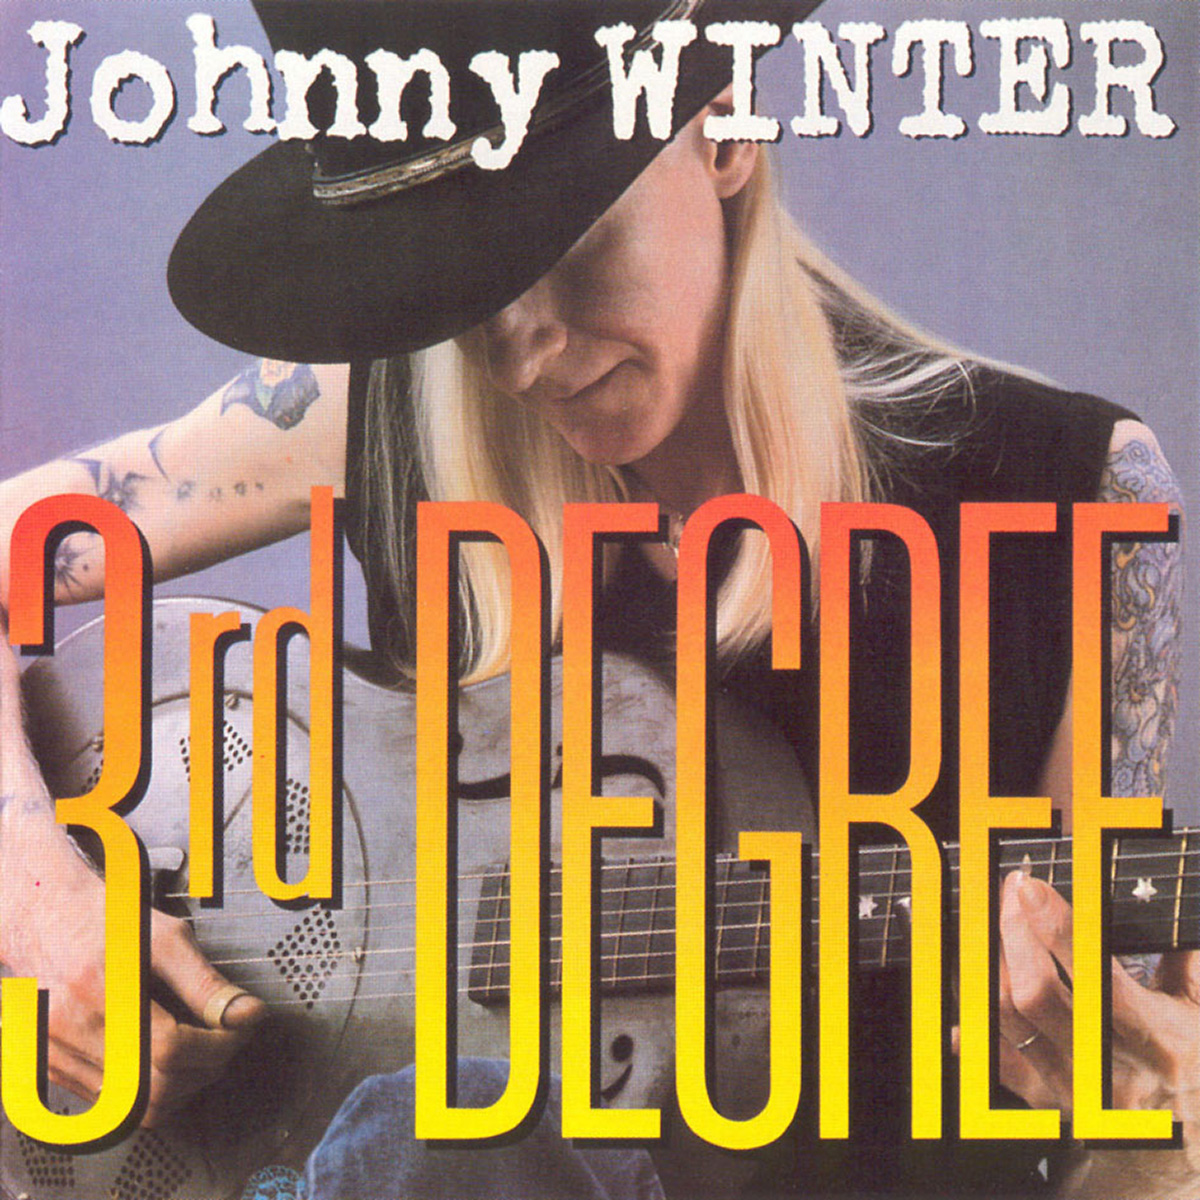 JOHNNY WINTER - Third Degree front cover photo https://vinyl-records.nl